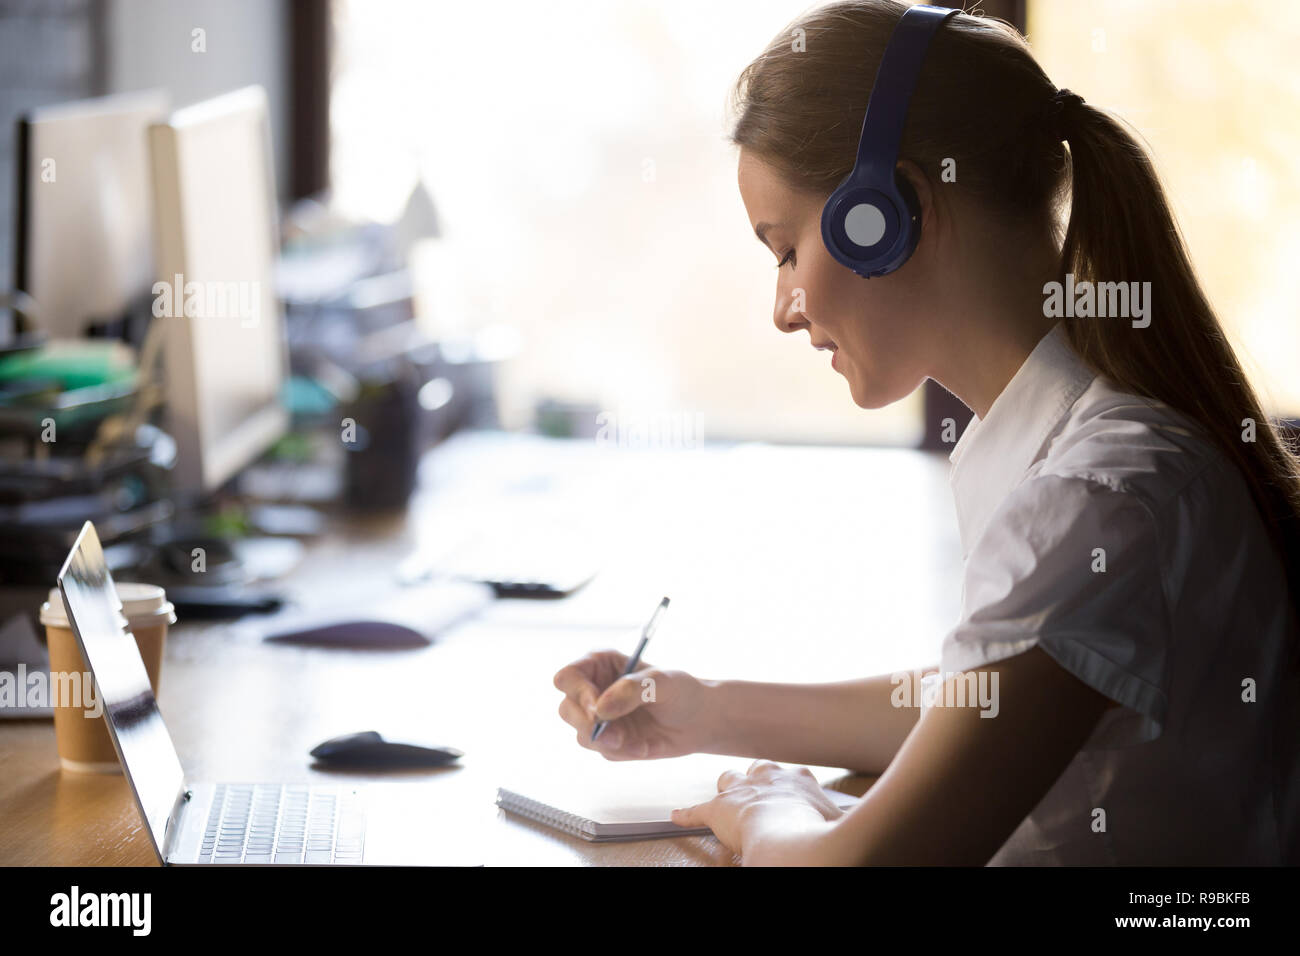 Focused woman wearing headphones write notes study online with t Stock Photo